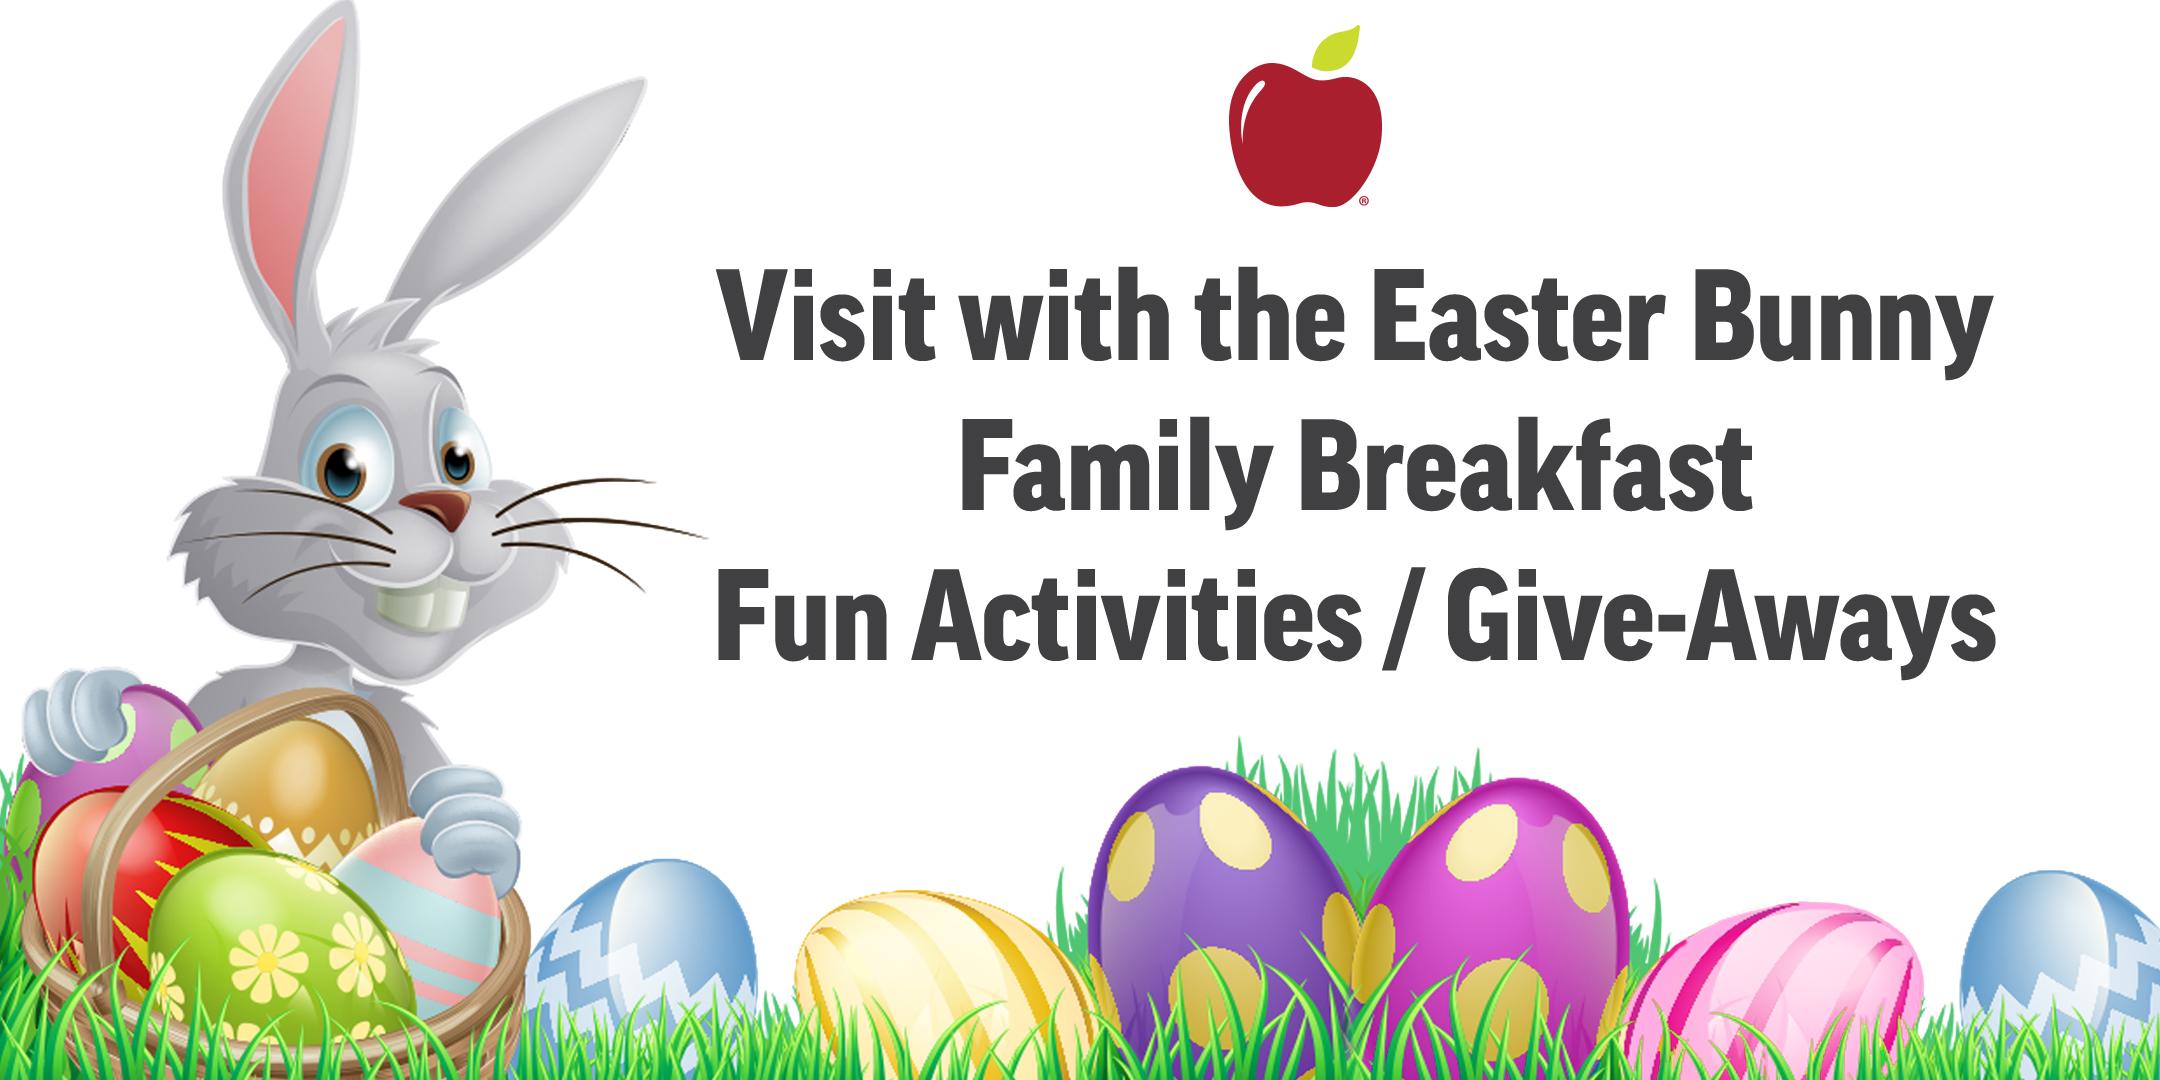 Breakfast with the Easter Bunny 2020 @ Applebee's Grill + Bar (SI Mall)